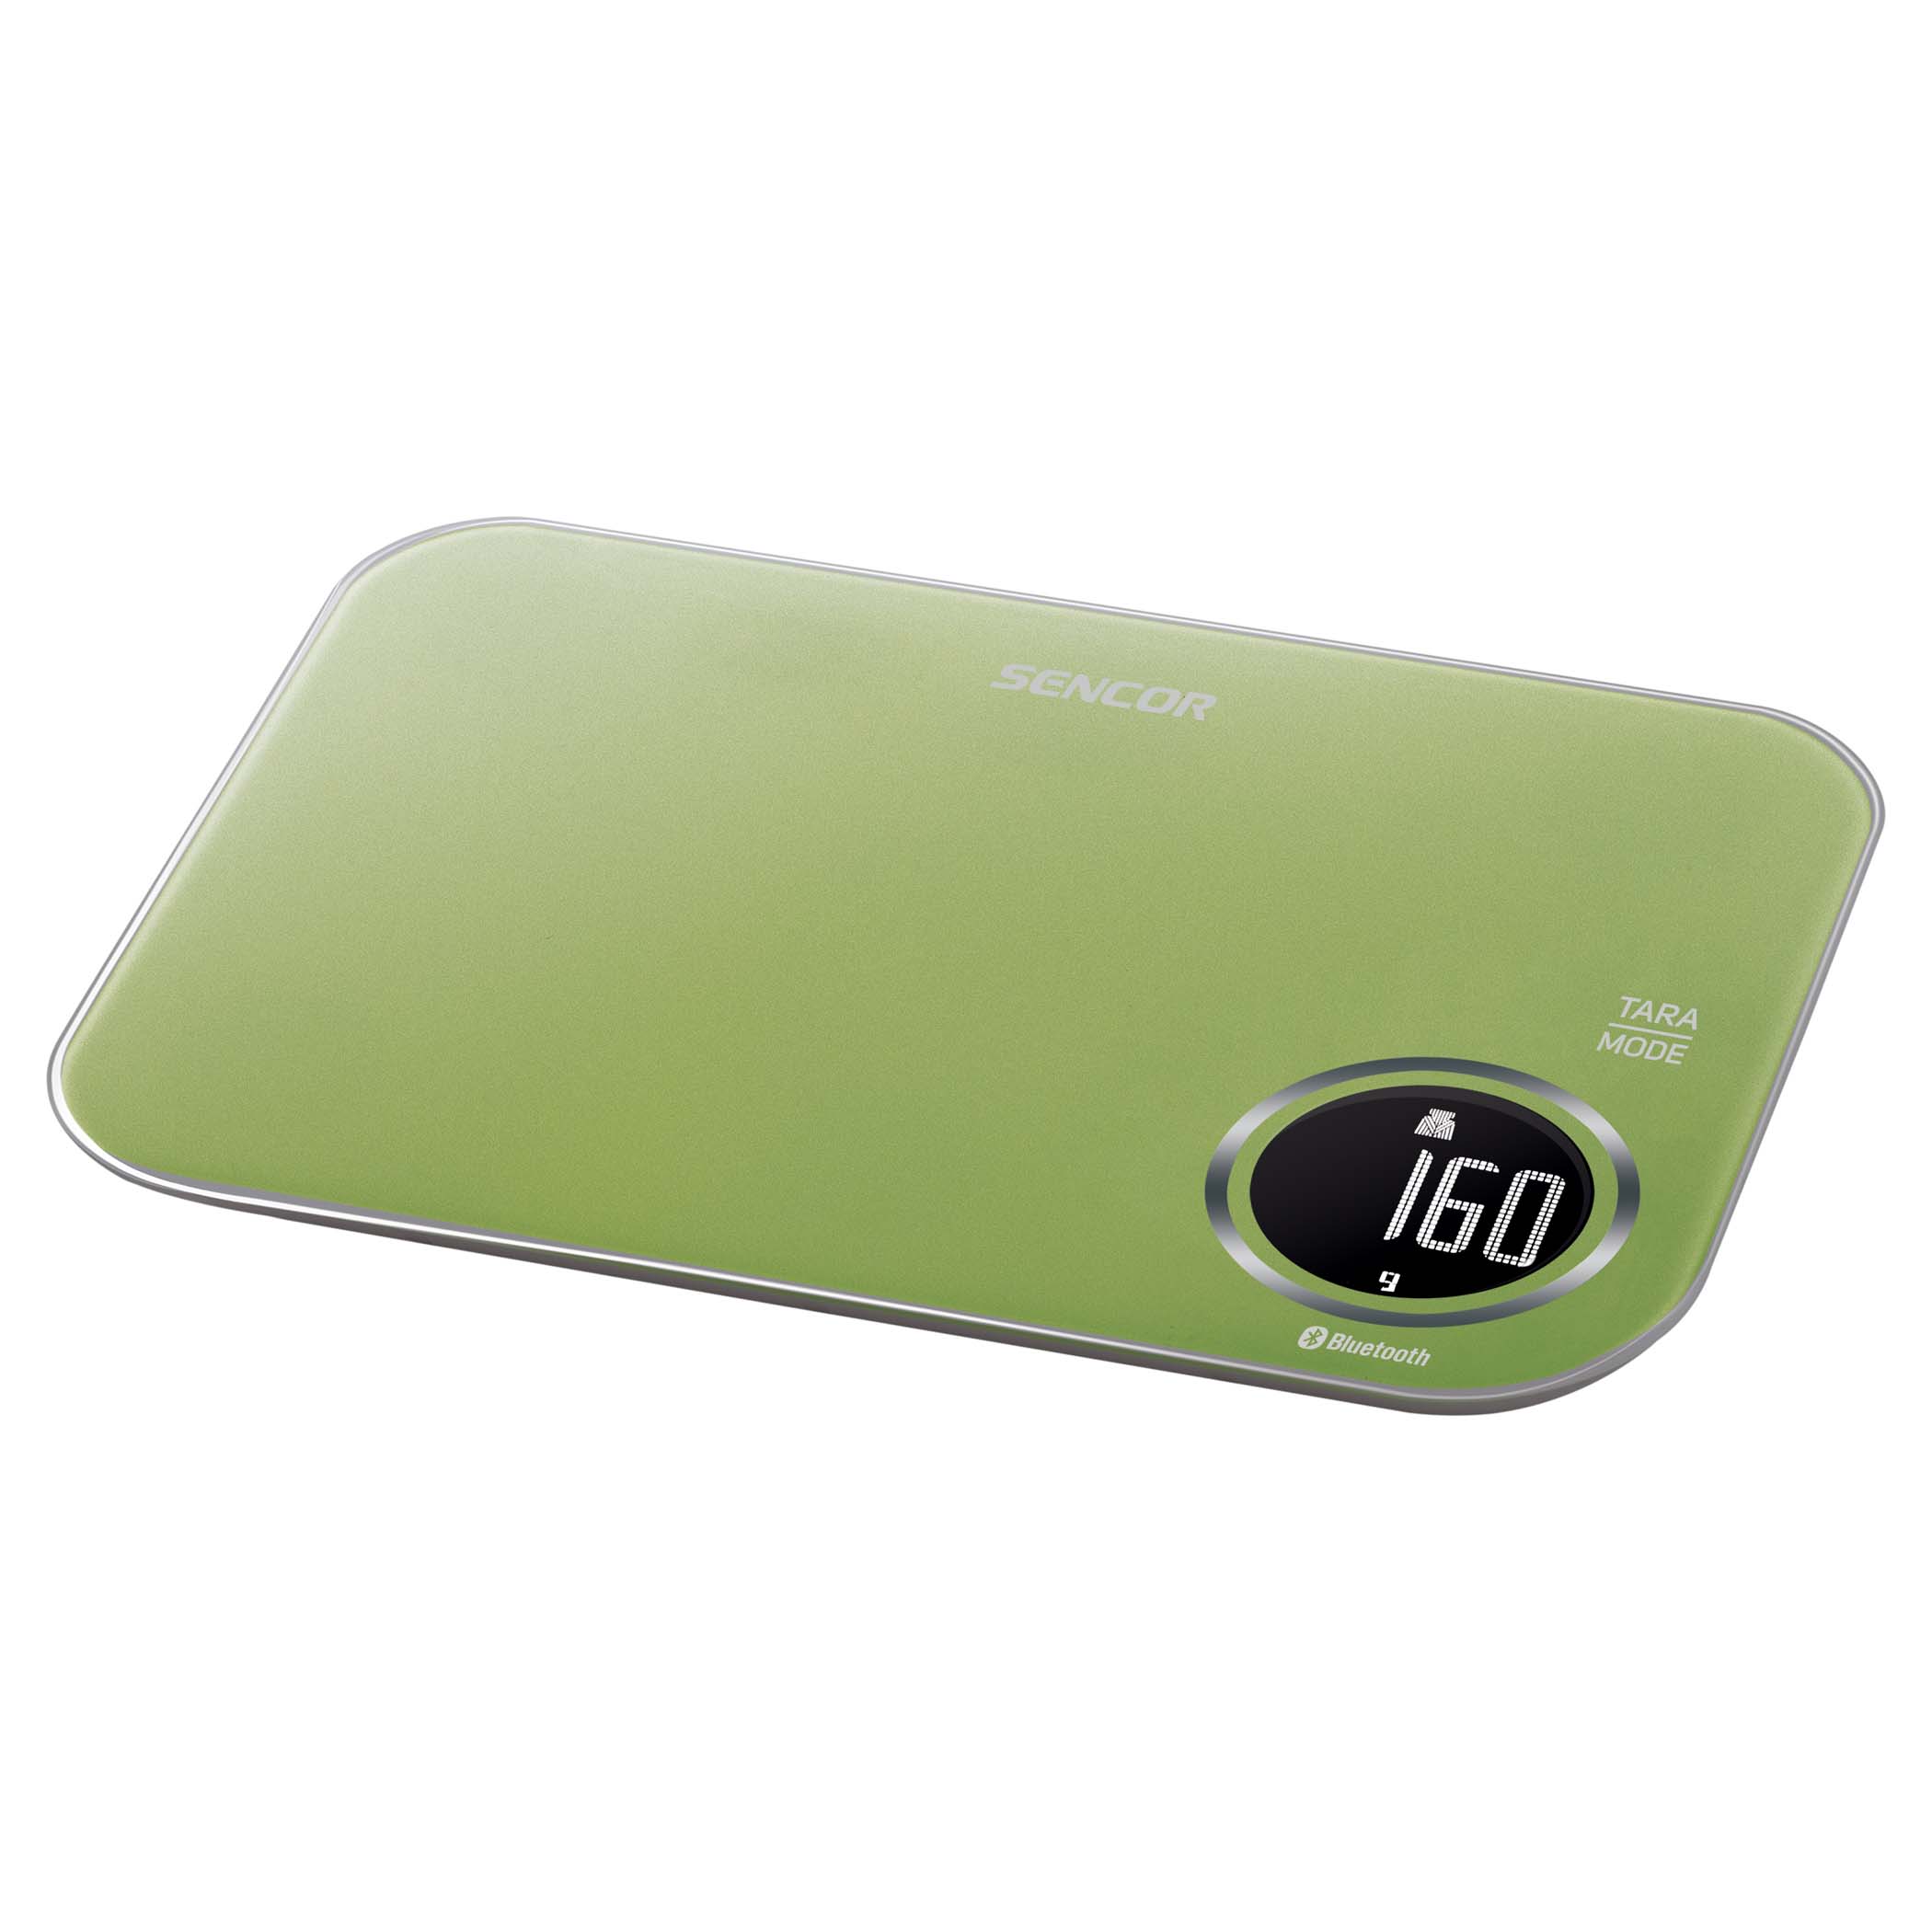 Smart Food Scale for Calorie Counting, Digital Kitchen Scale for